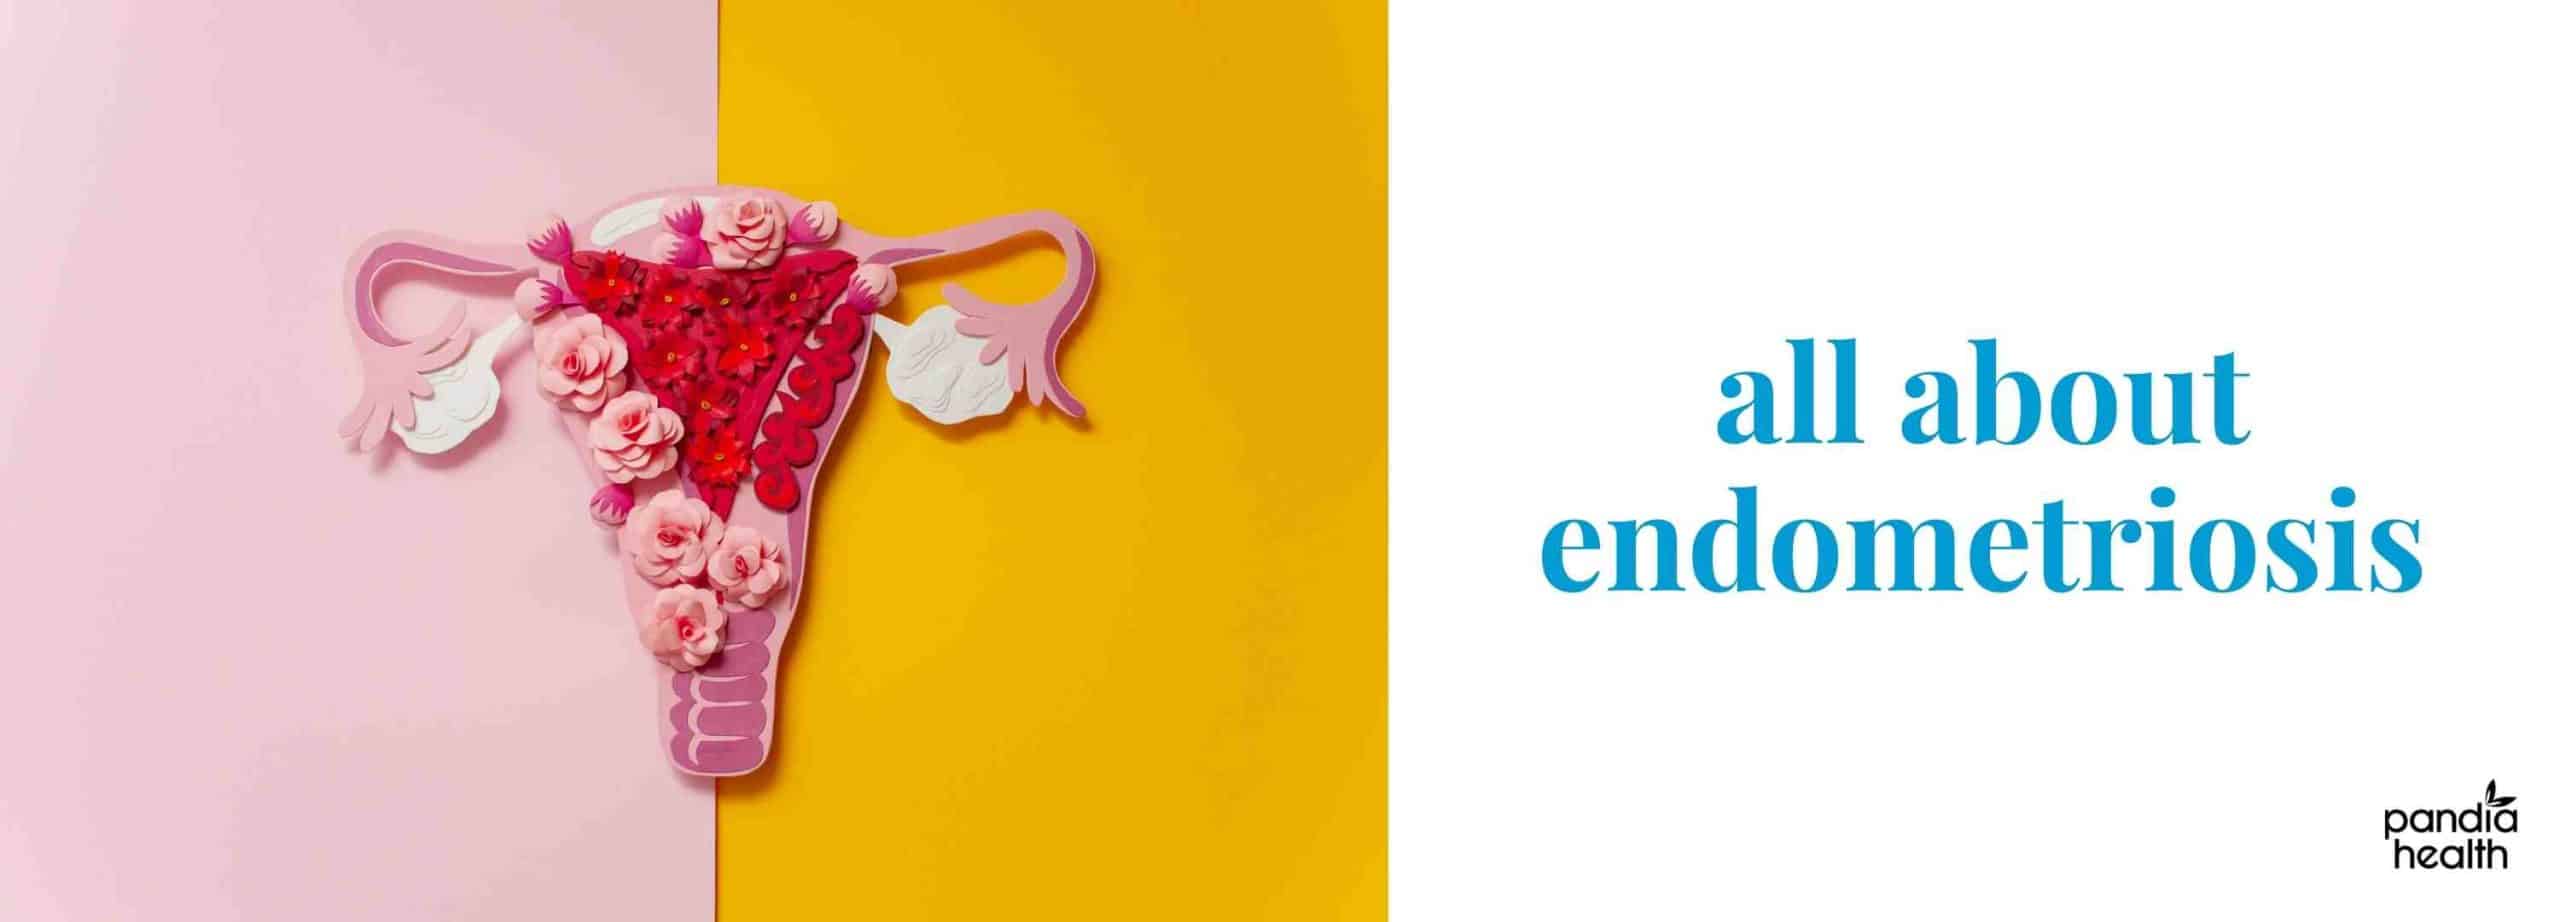 All about endometriosis